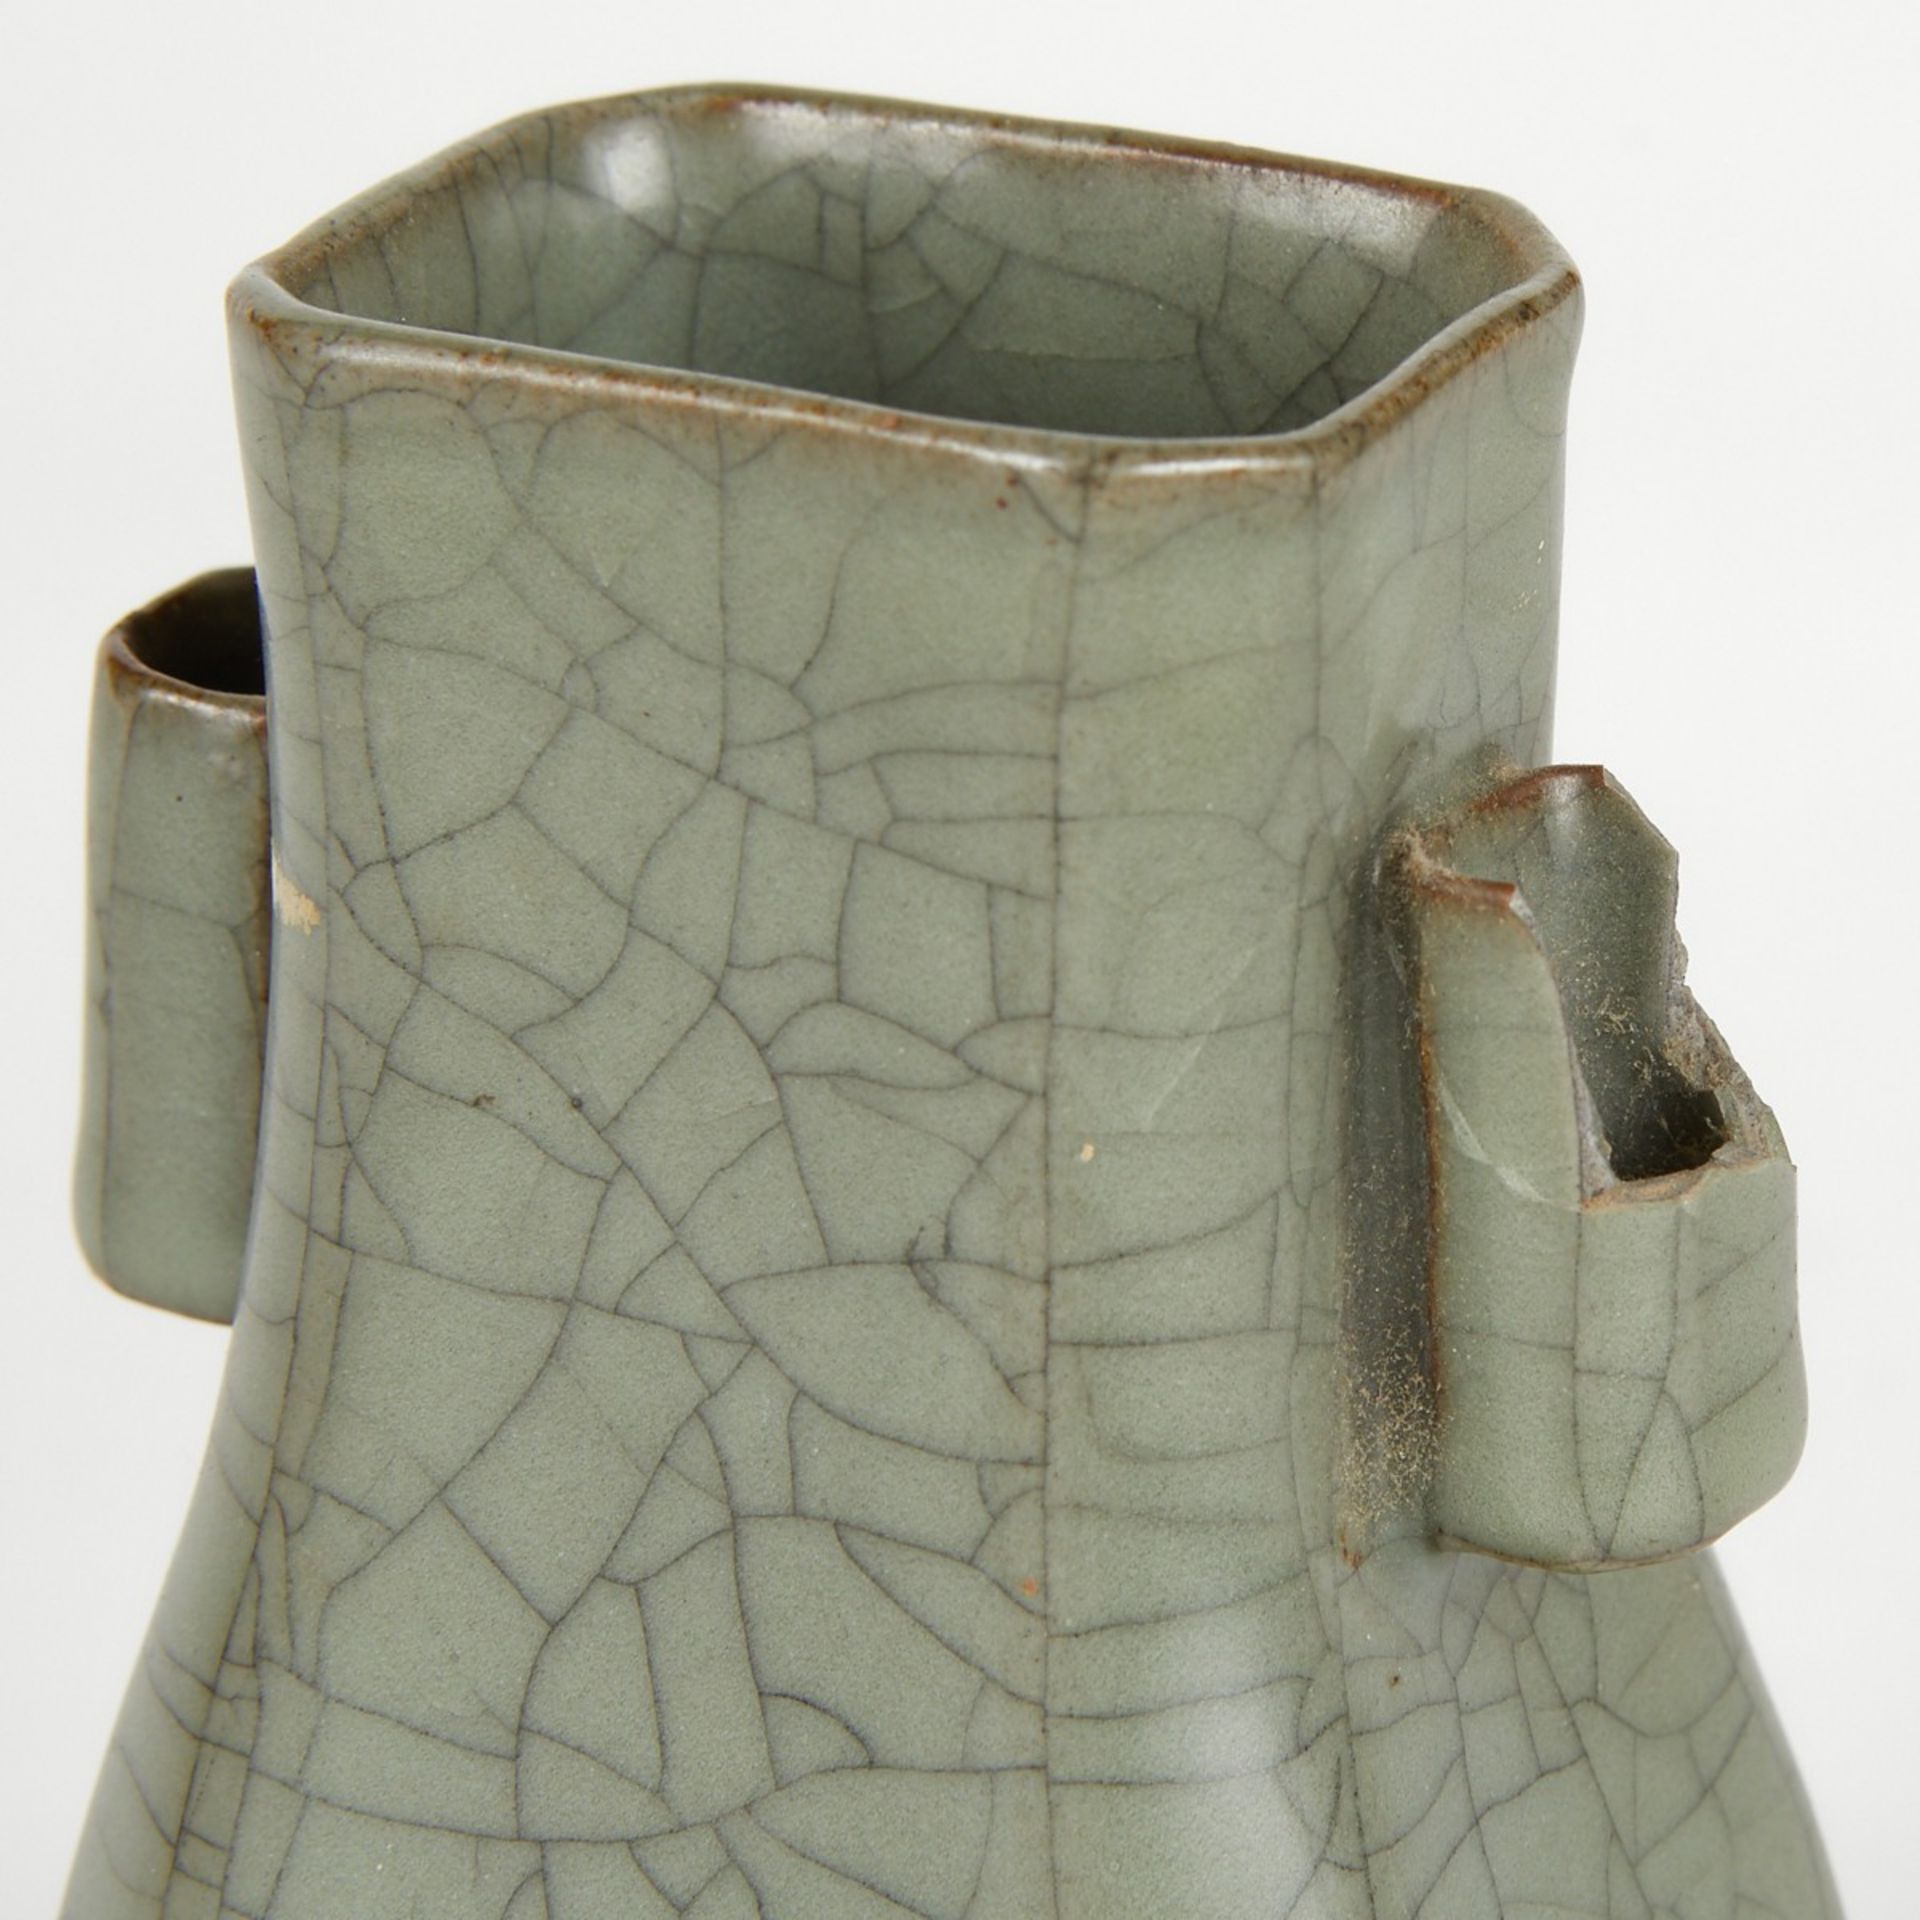 Chinese High Fired Ceramic Crackle Hu Vase - Image 7 of 7